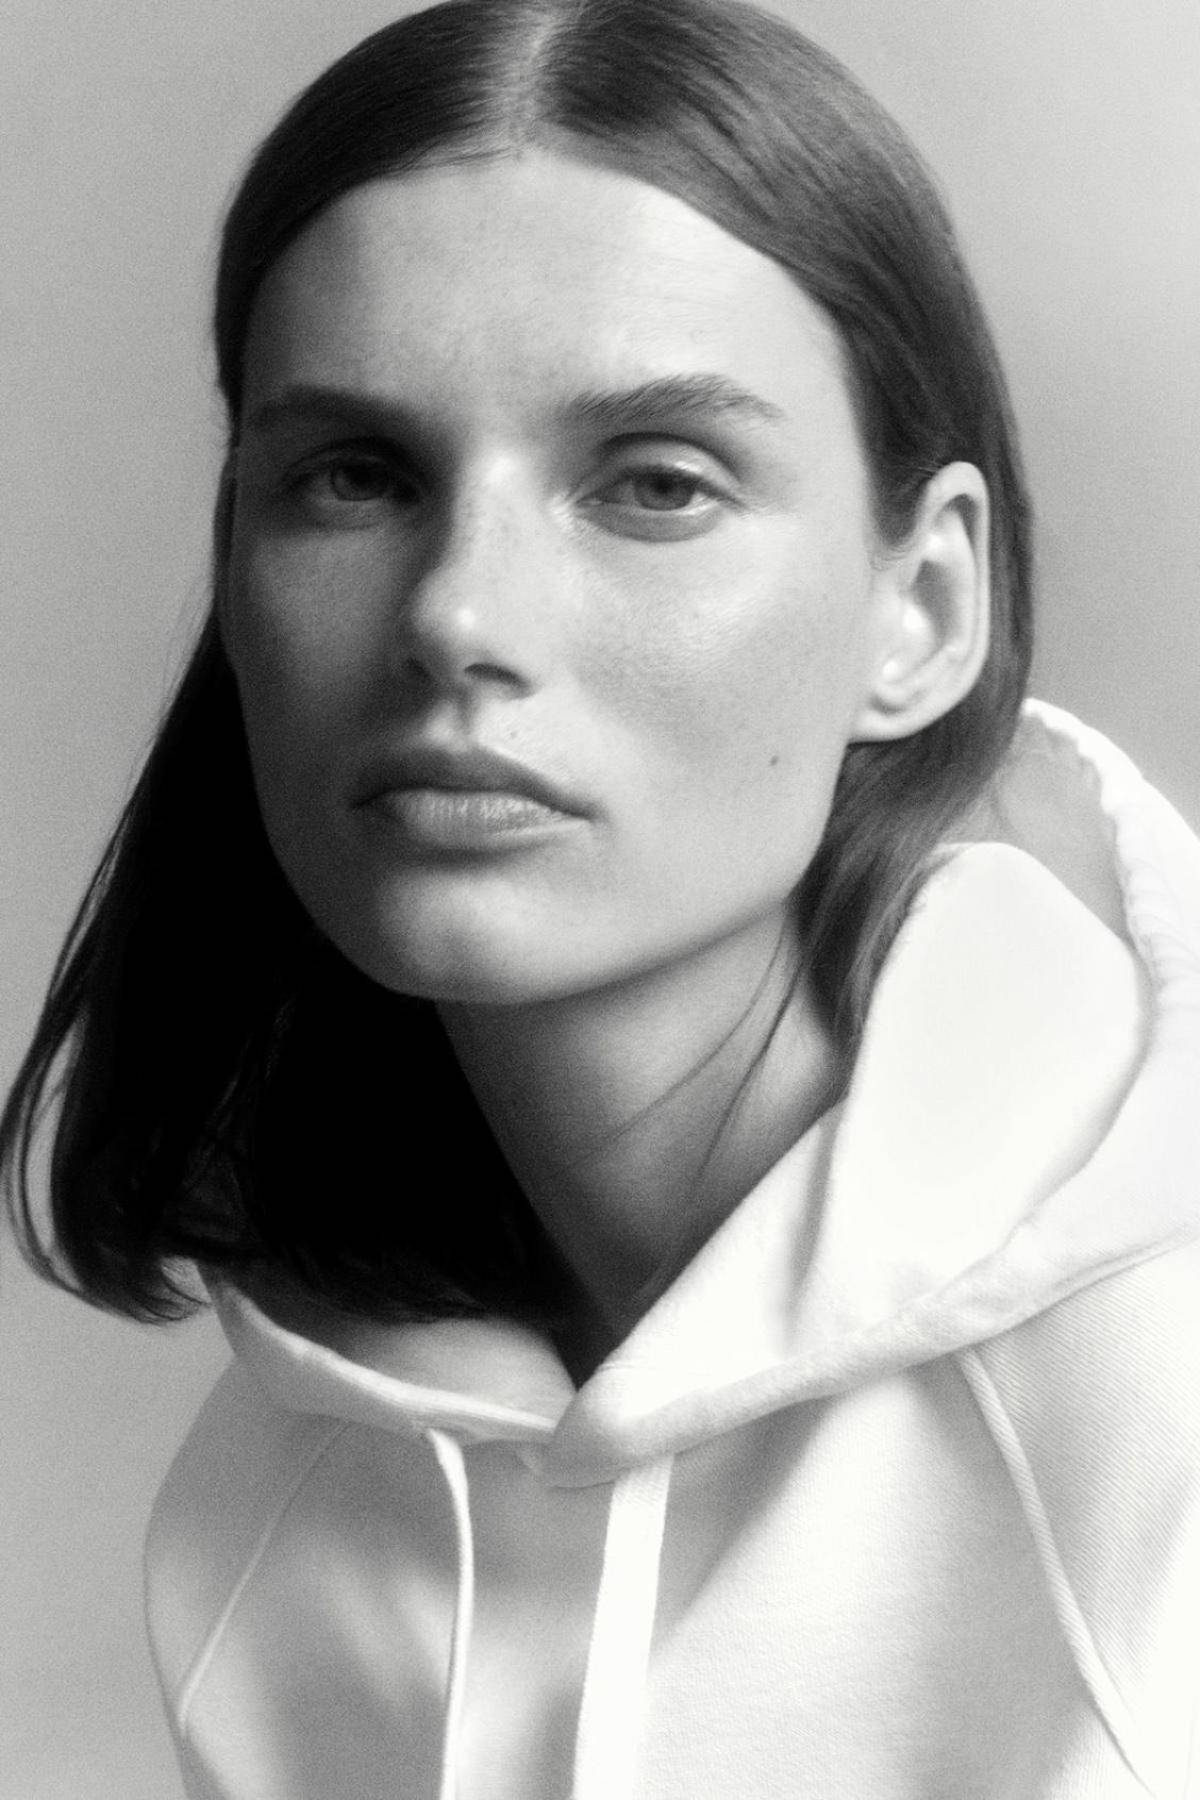 Giedre Dukauskaite by Robin Galiegue for COS Leisurewear Fall 2021 Ad Campaign. Clothing: COS WHITE RELAXED-FIT HOODIE